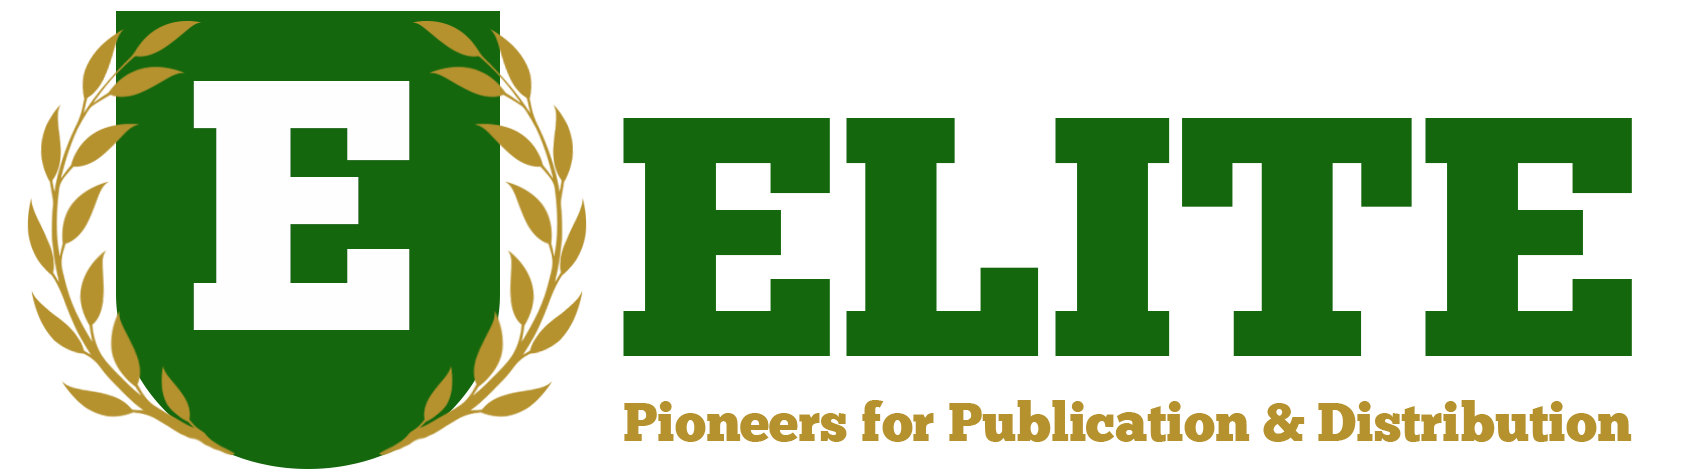 Elite pioneer for publication and distribution